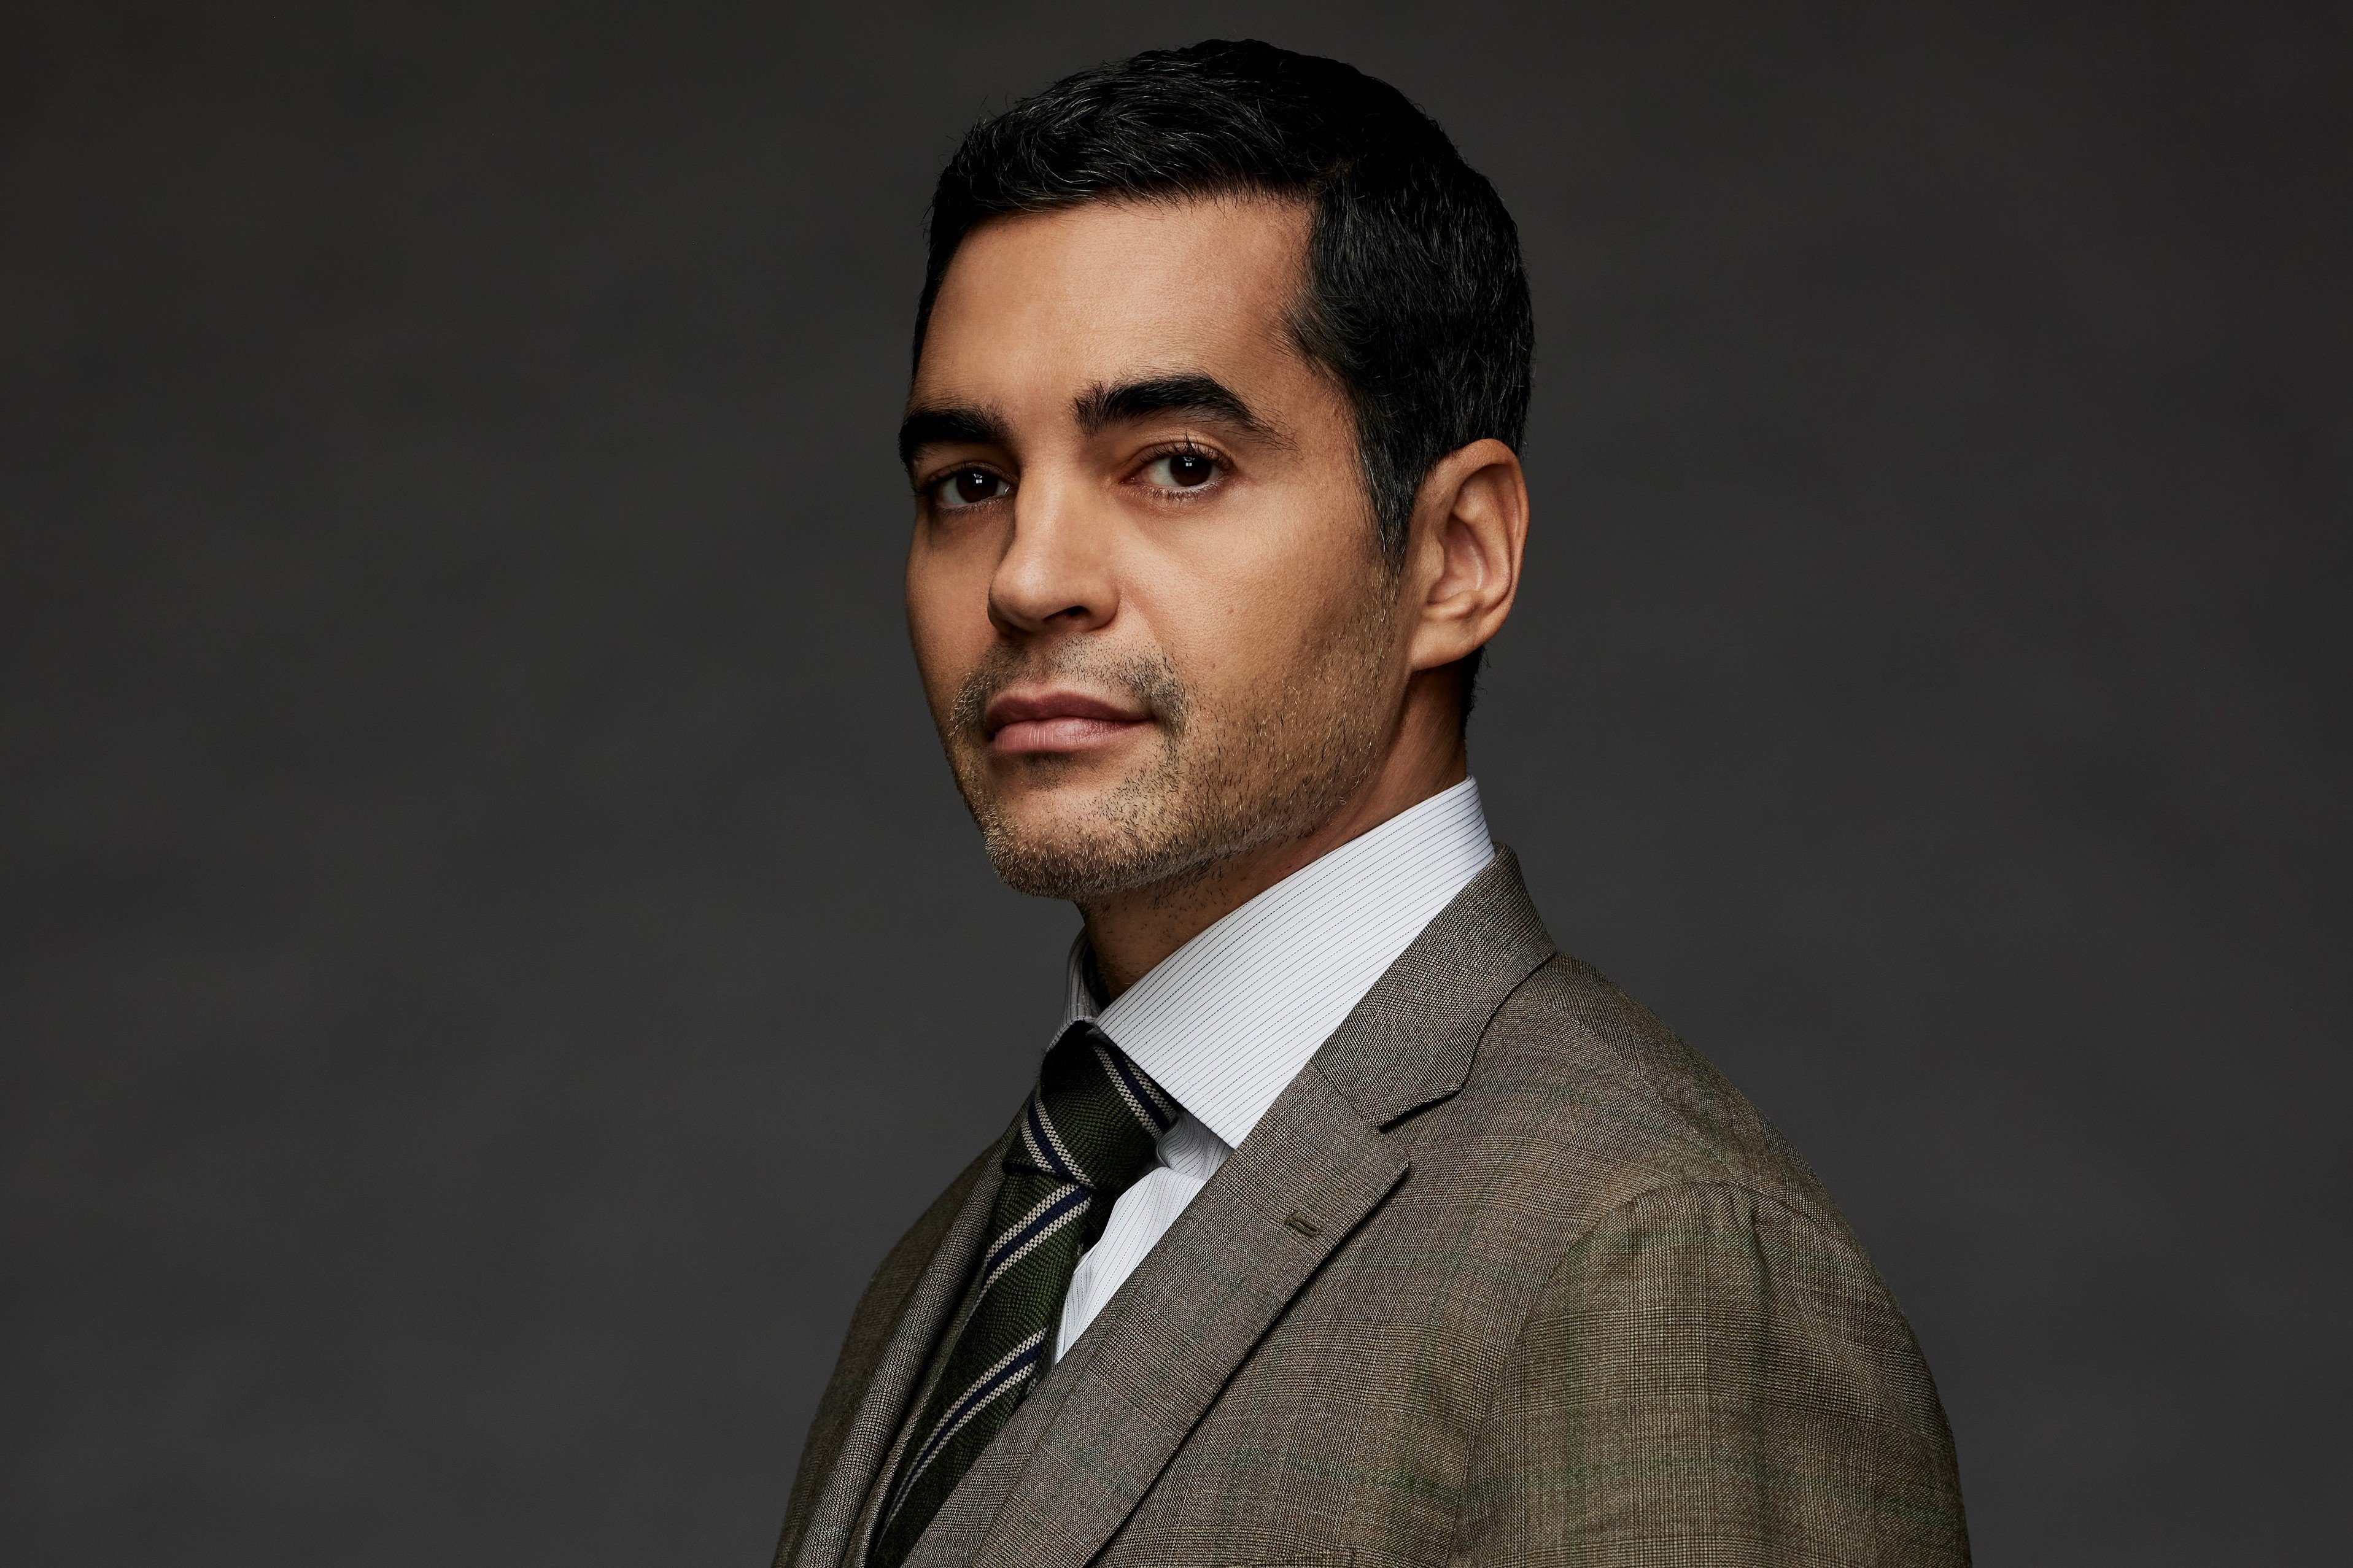 Ramón Rodríguez, in character as Will Trent, wears a tan suit over a white button-up shirt and dark green, gray, and black tie.